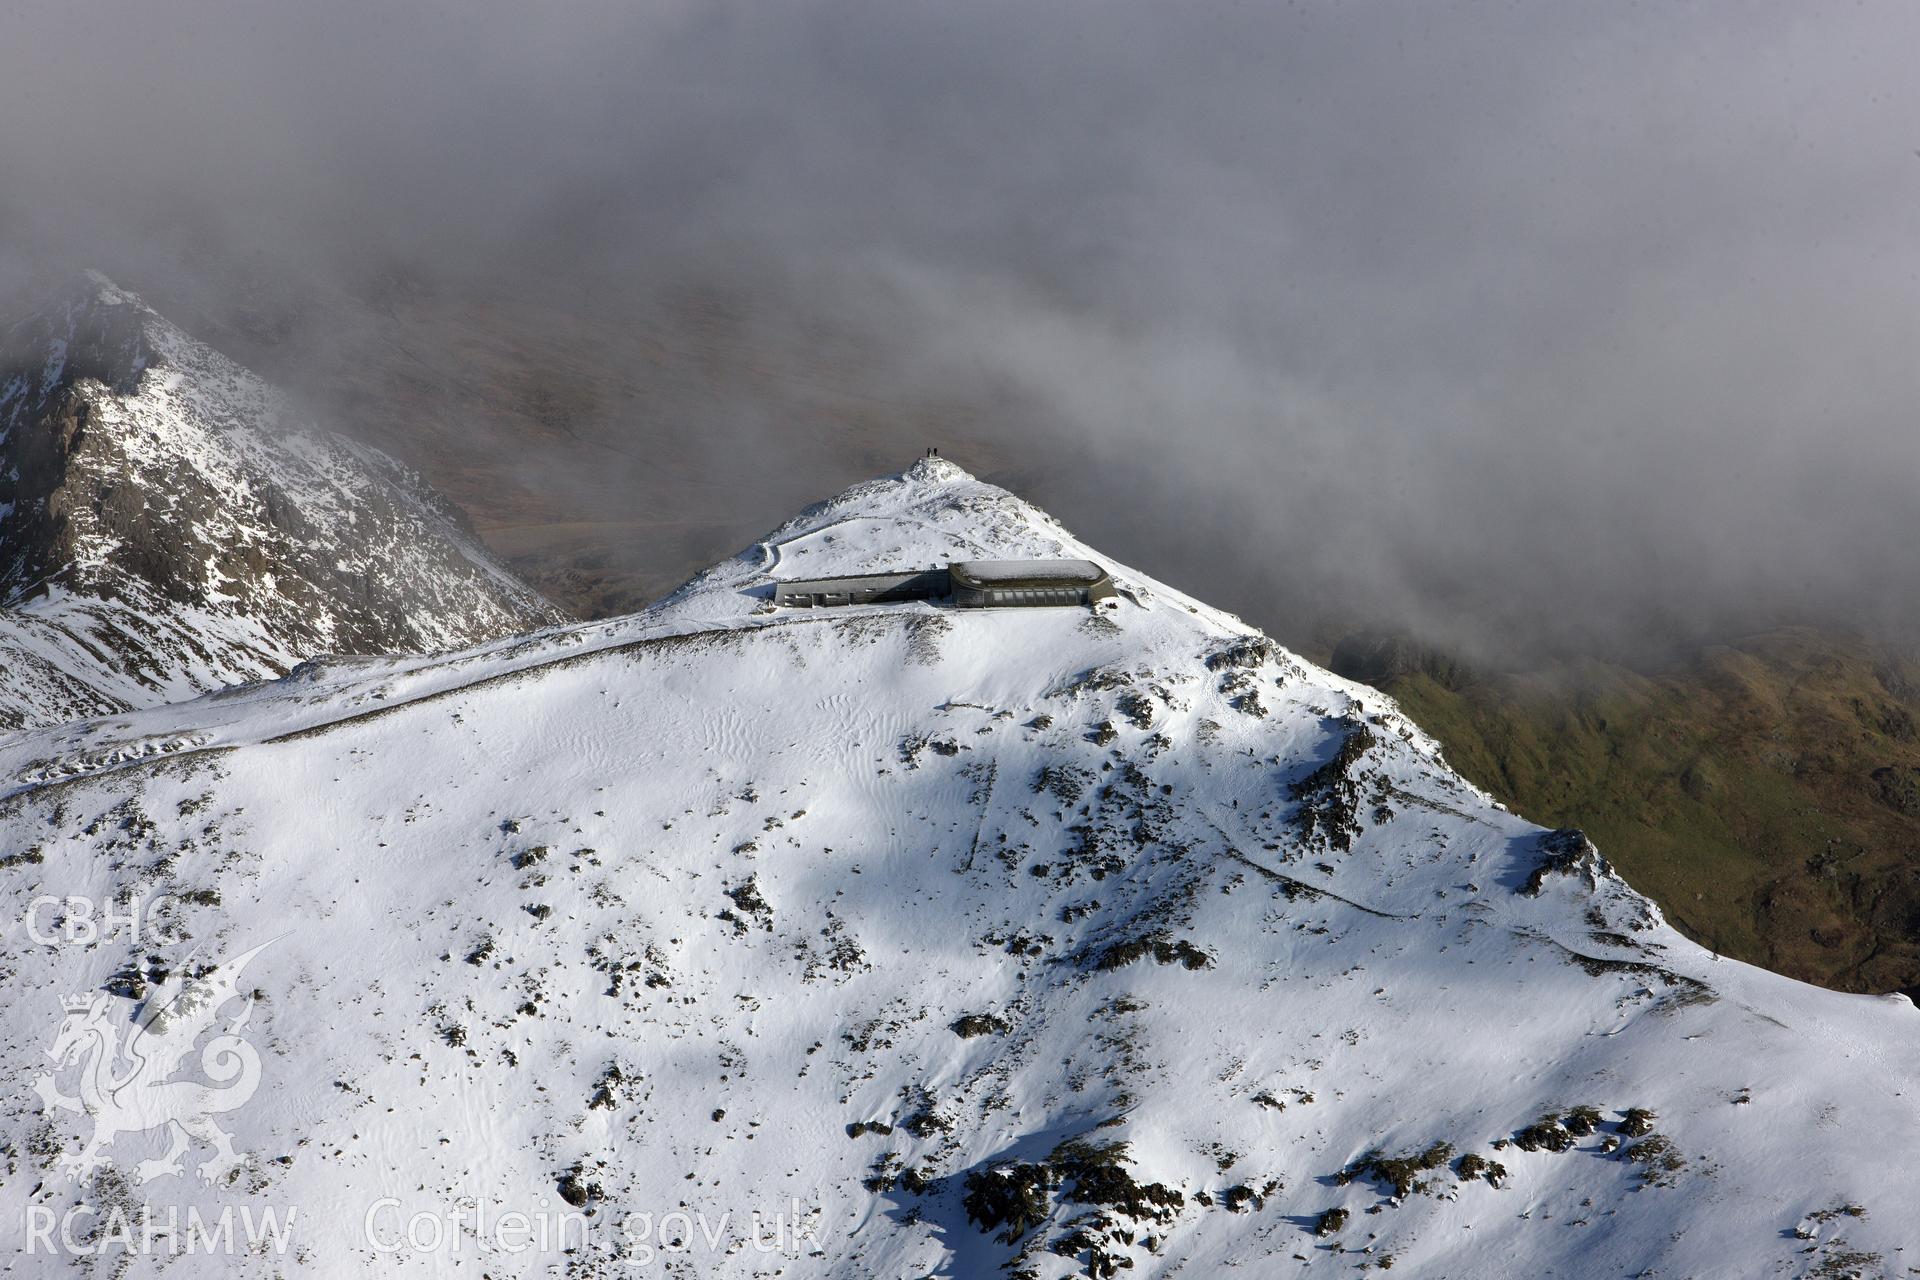 RCAHMW colour oblique photograph of Snowdon summit under snow, zoom view from the west with two figures at summit. Taken by Toby Driver on 10/12/2012.